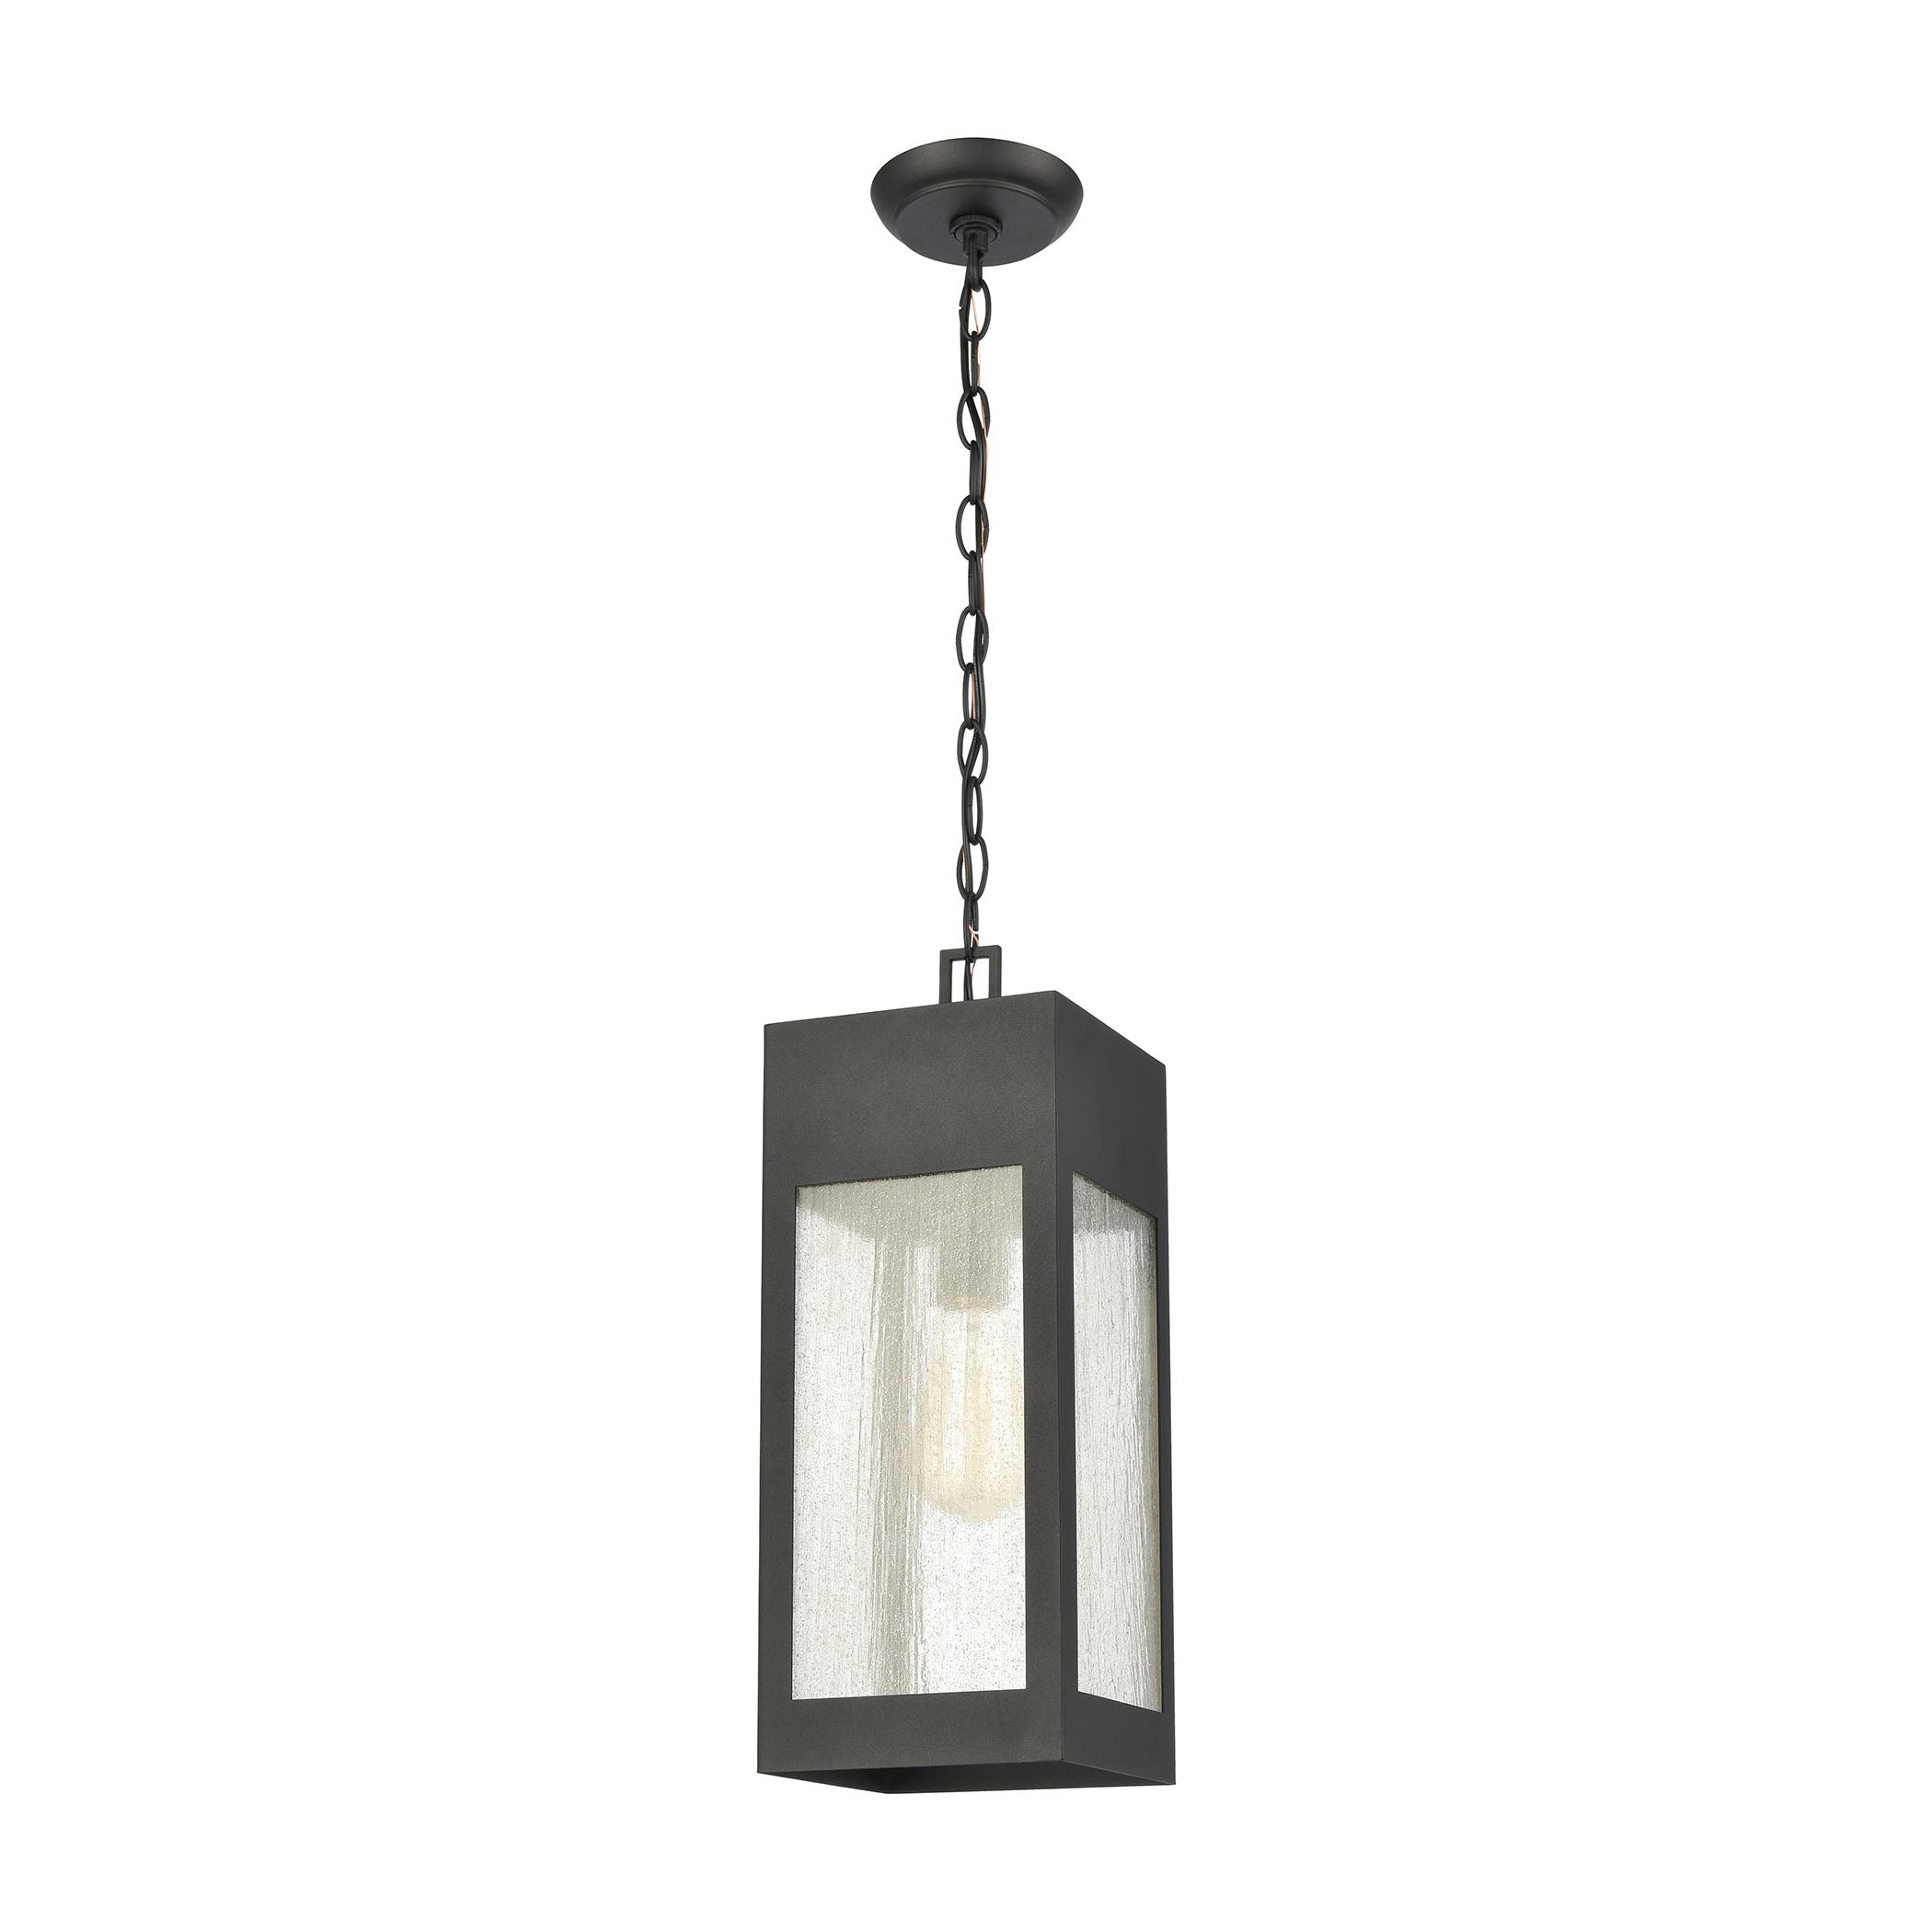 ELK Lighting 57303/1 Angus 1-Light Outdoor Pendant in Charcoal with Seedy Glass Enclosure